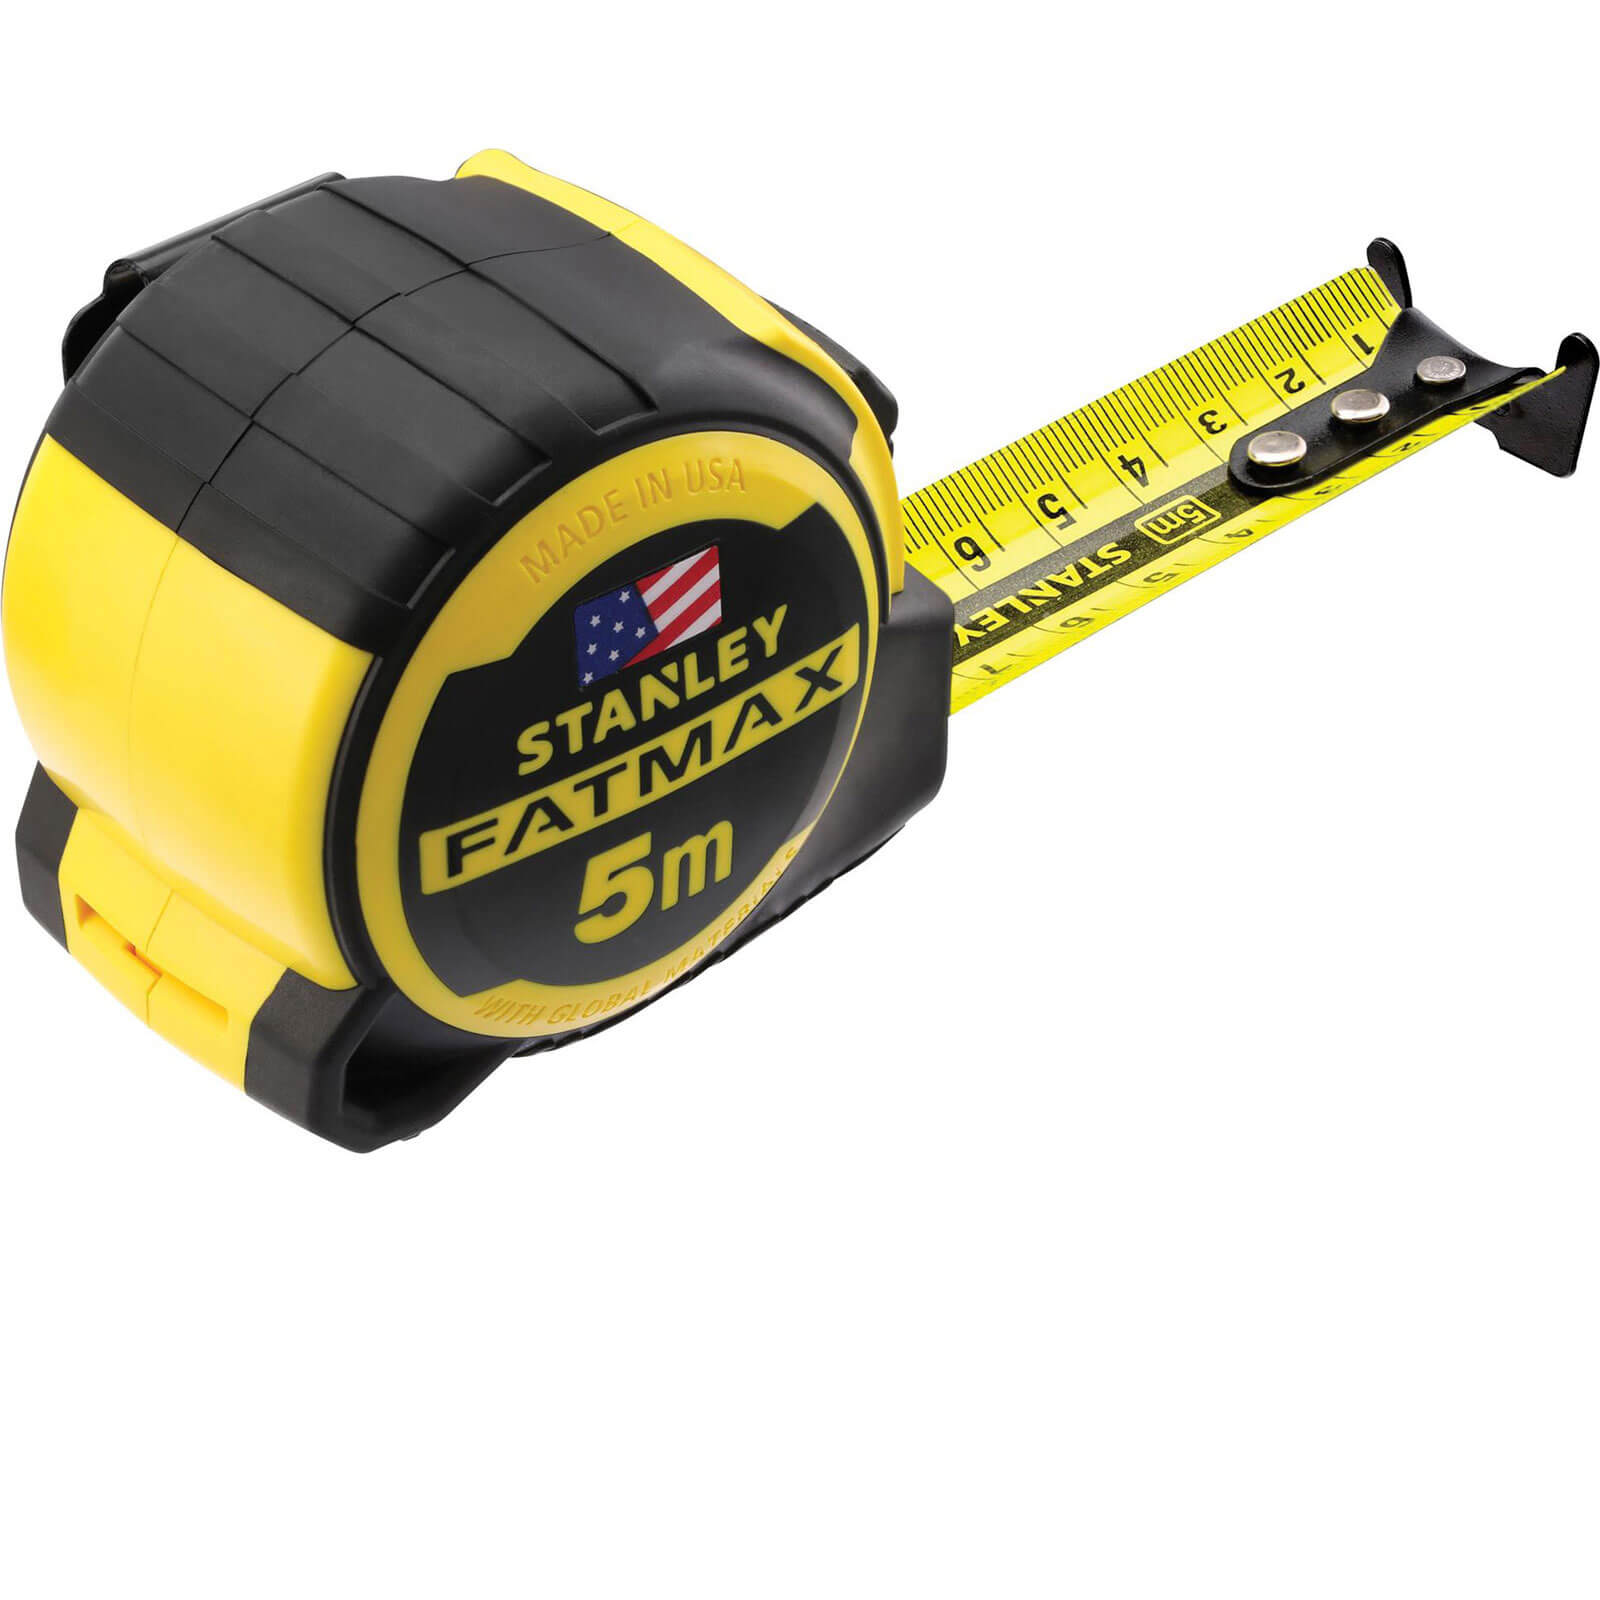 Pro Metric only 5m Tape Measure